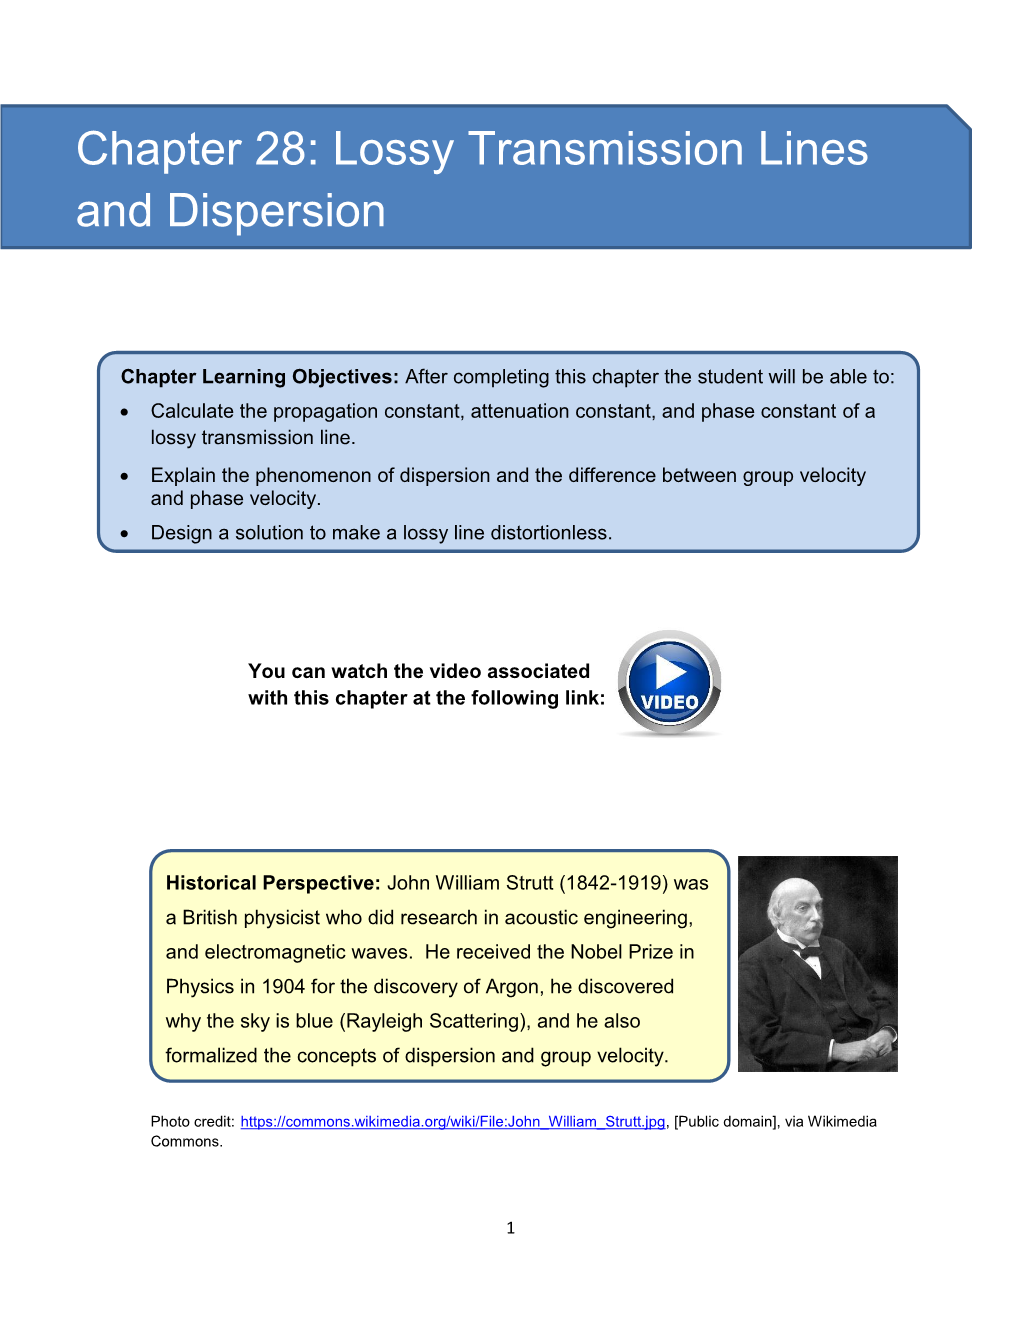 Chapter 28: Lossy Transmission Lines and Dispersion